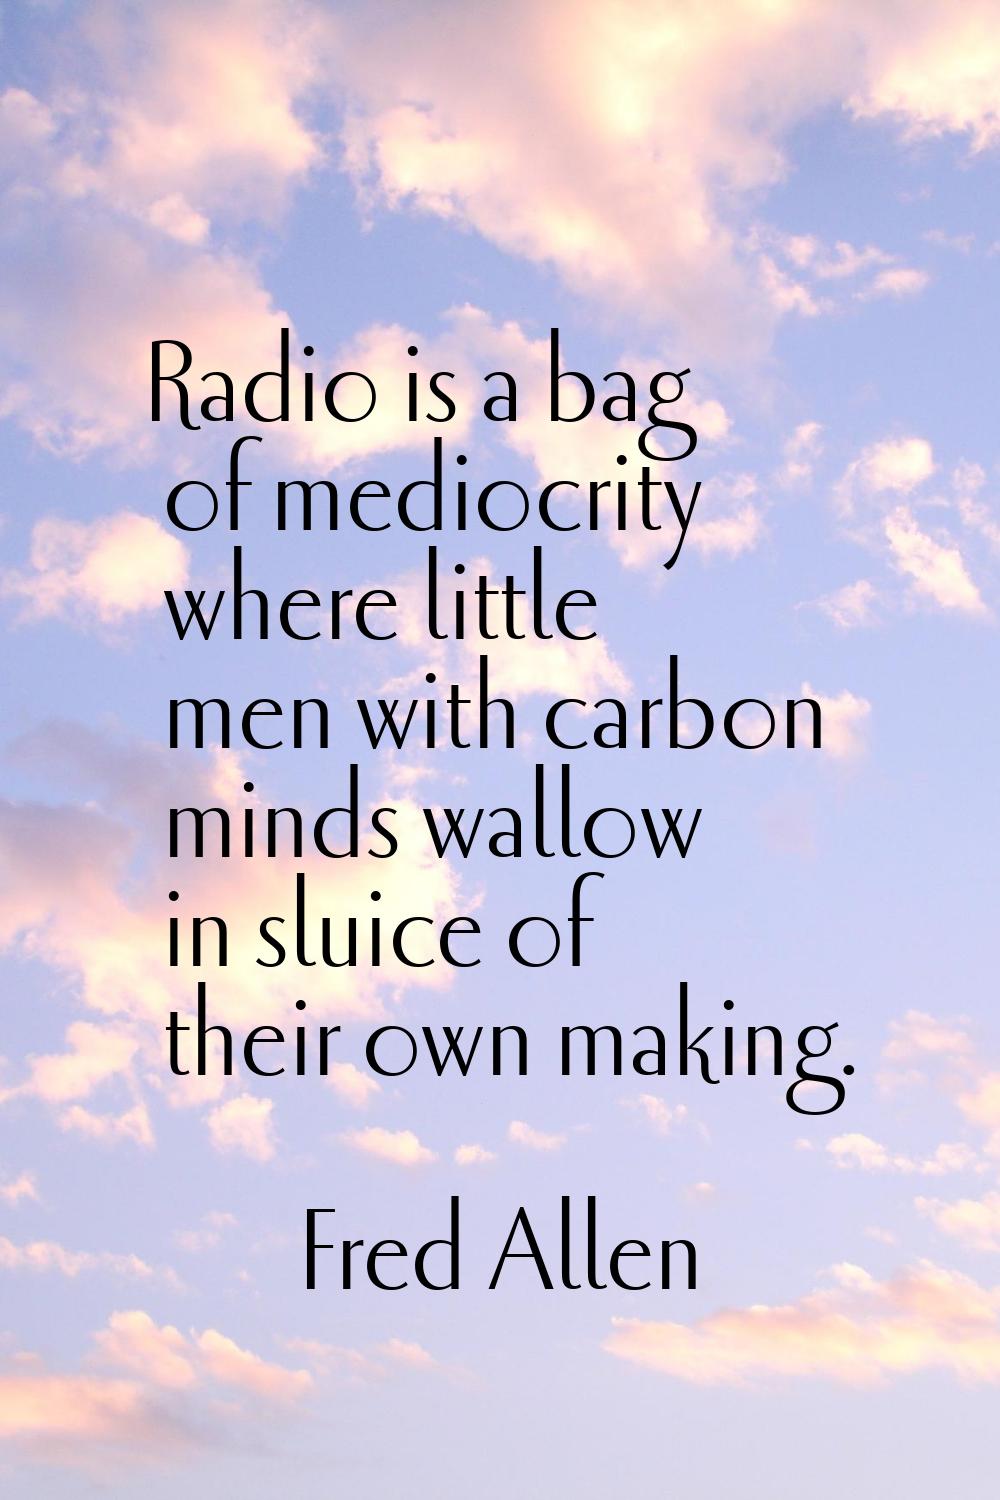 Radio is a bag of mediocrity where little men with carbon minds wallow in sluice of their own makin